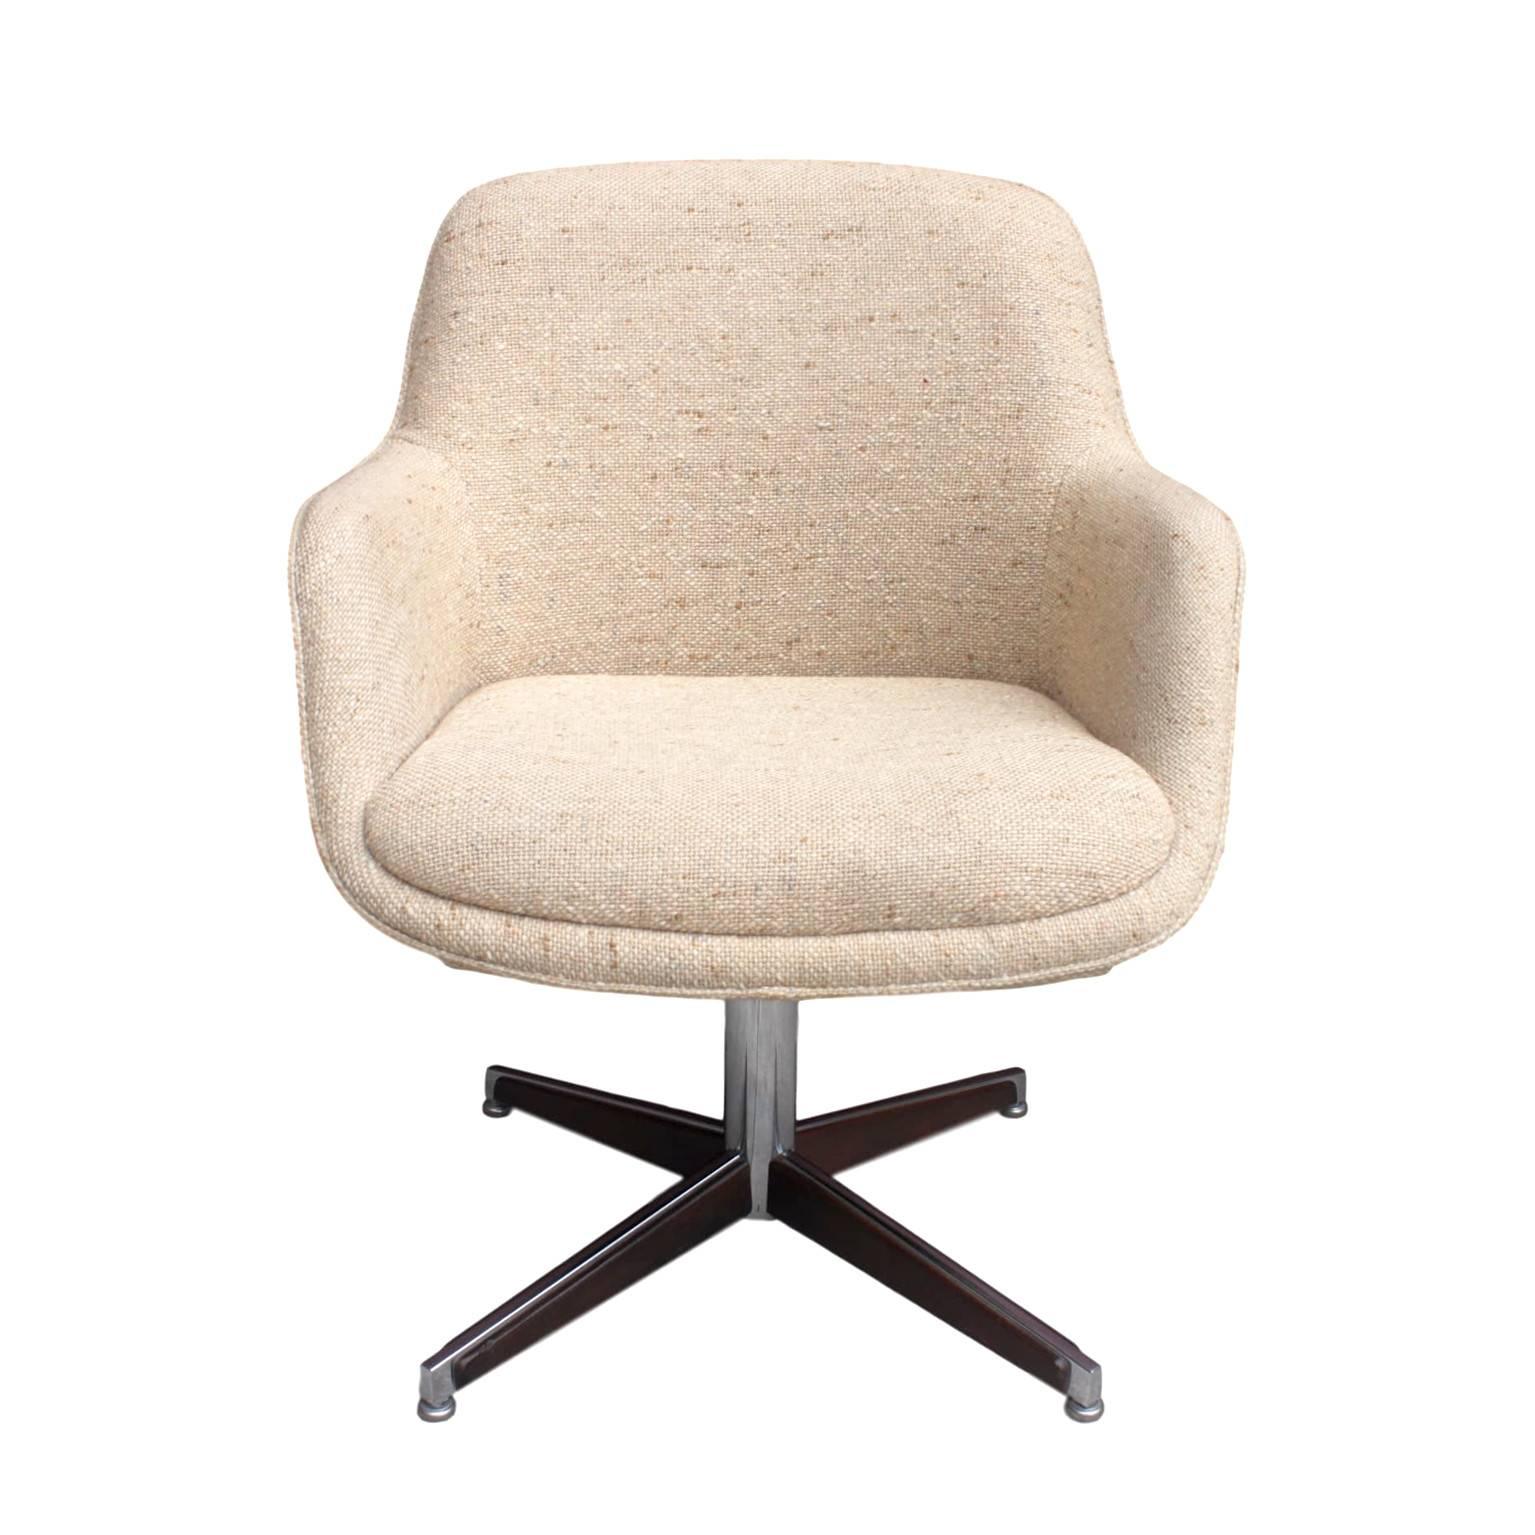 This great little desk chair features a Classic Mid-Century shape with original cream tweed upholstery. Base is chrome steel with unique solid walnut side-mouldings. Great style and neutral color that can fit with any office!

FREE HOLIDAY SHIPPING